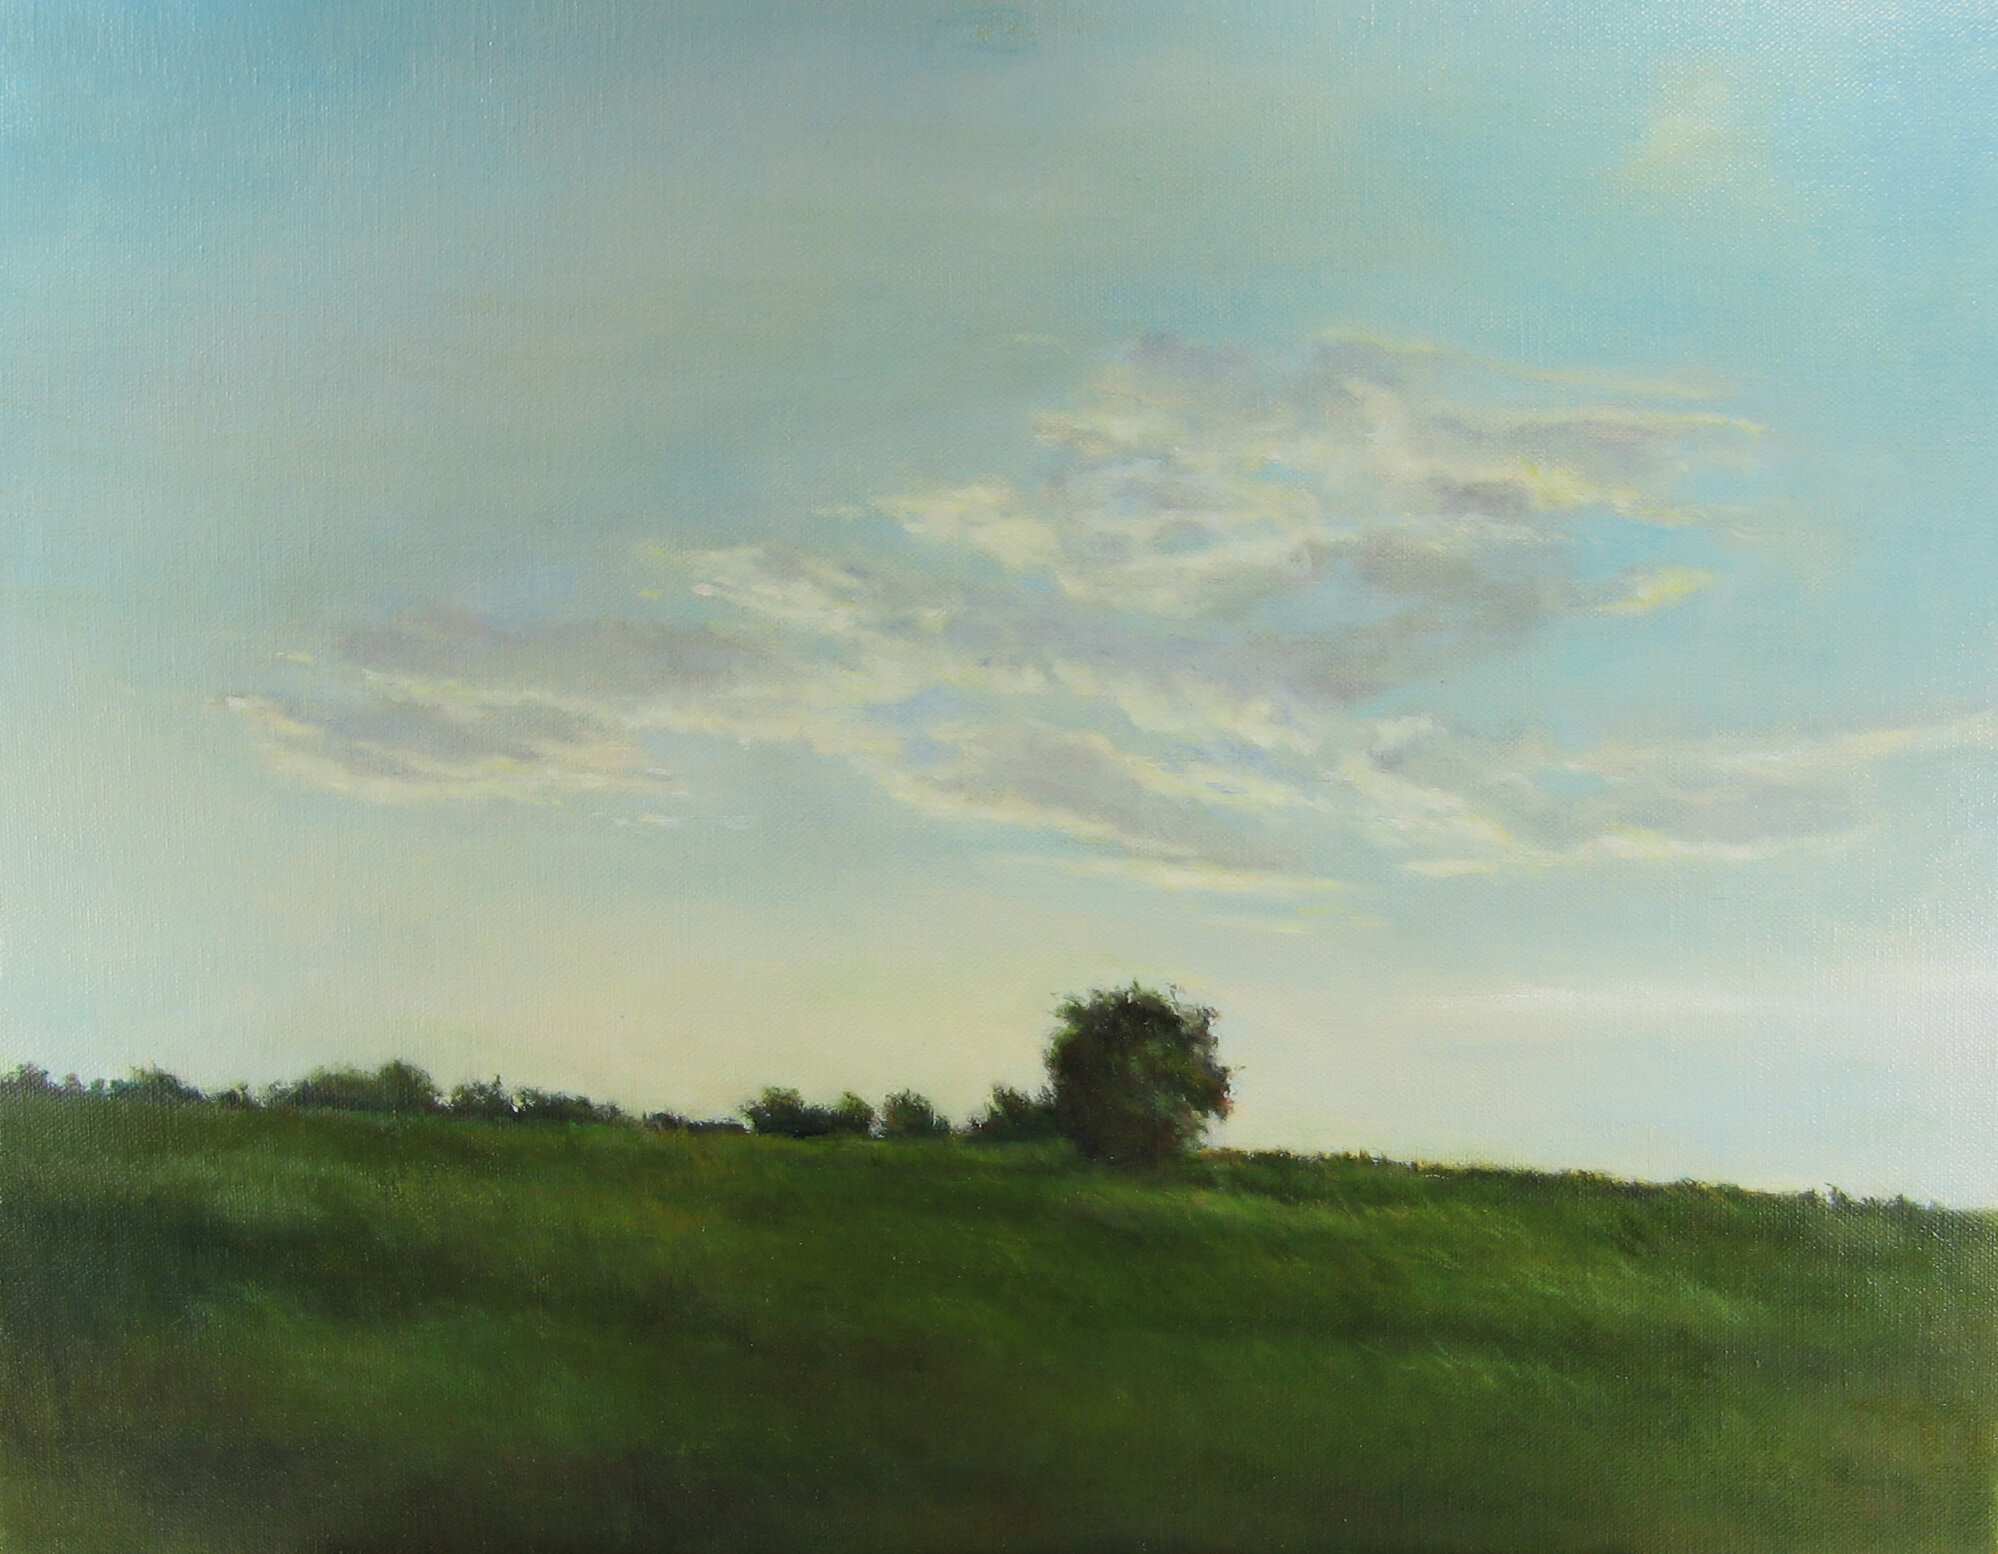  Mary Lou Schempf  Blue Sky, 14” x 18”, oil on canvas   (private collection)   